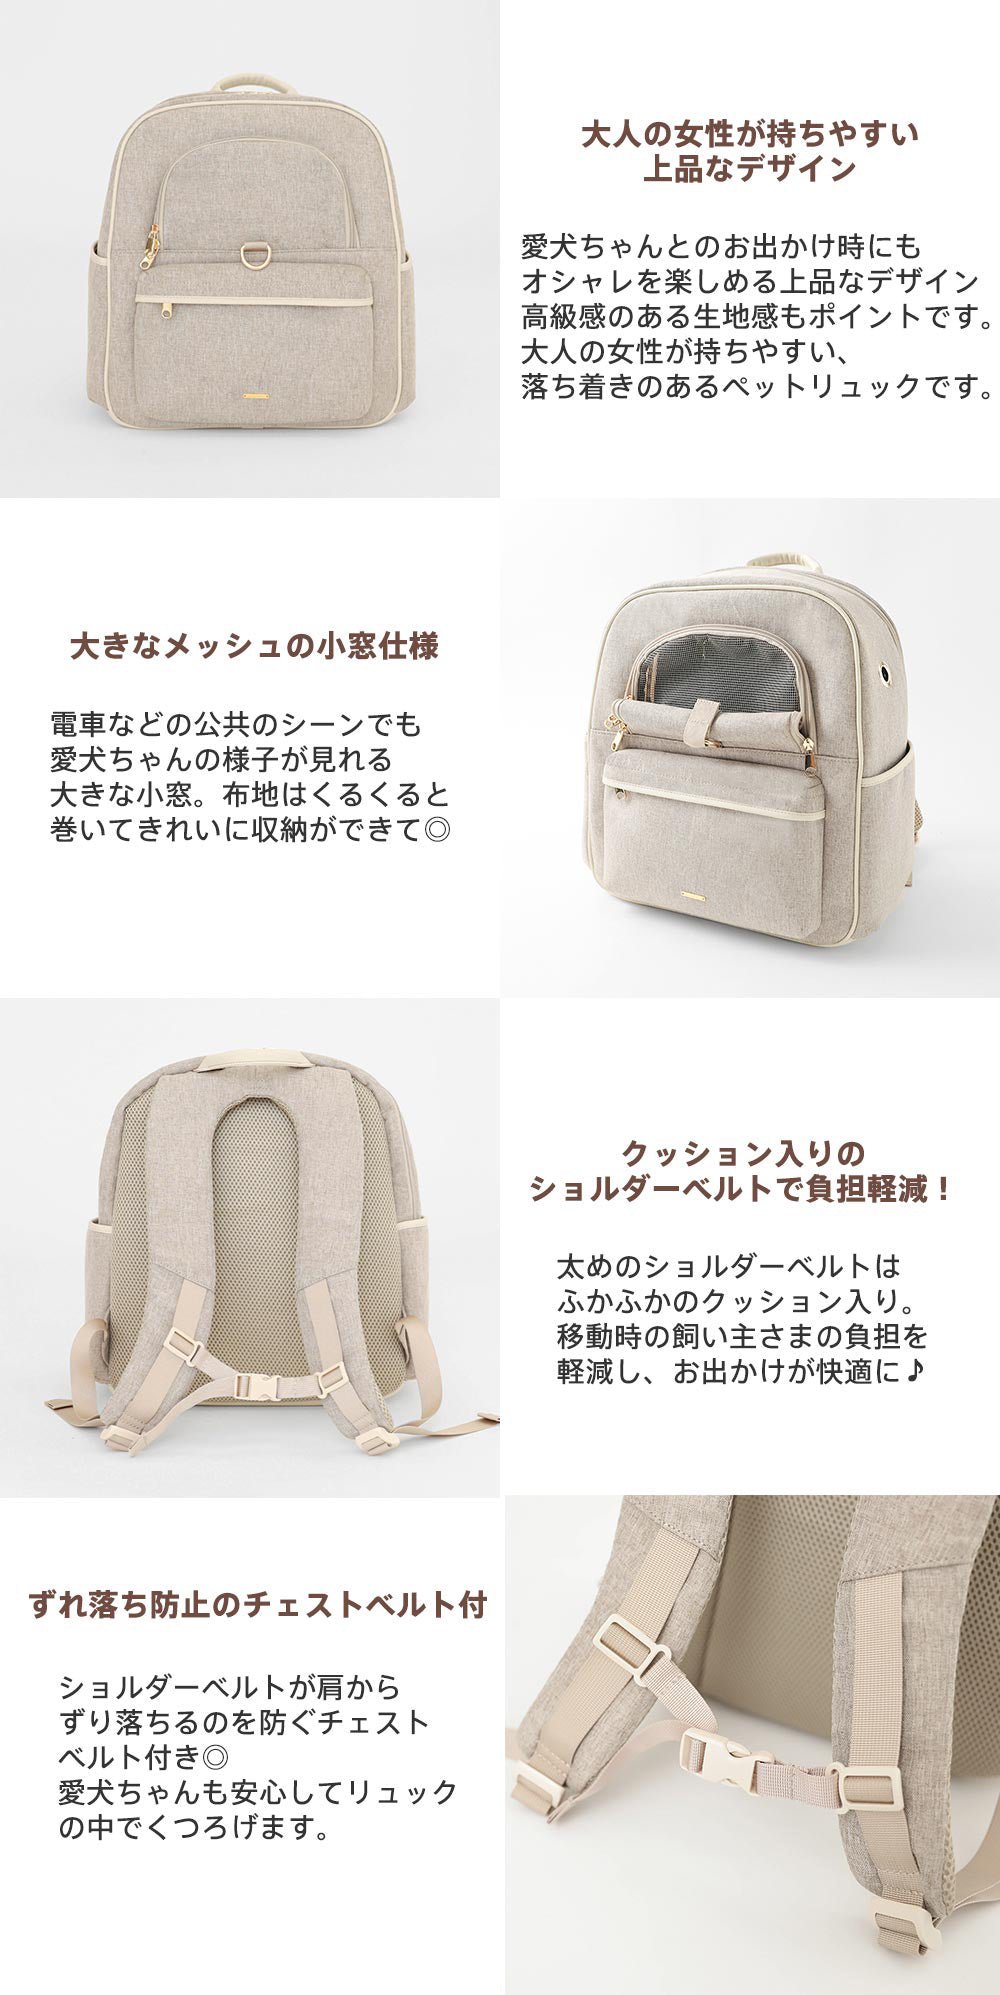 Small dog/bag/backpack/carry back/point 2